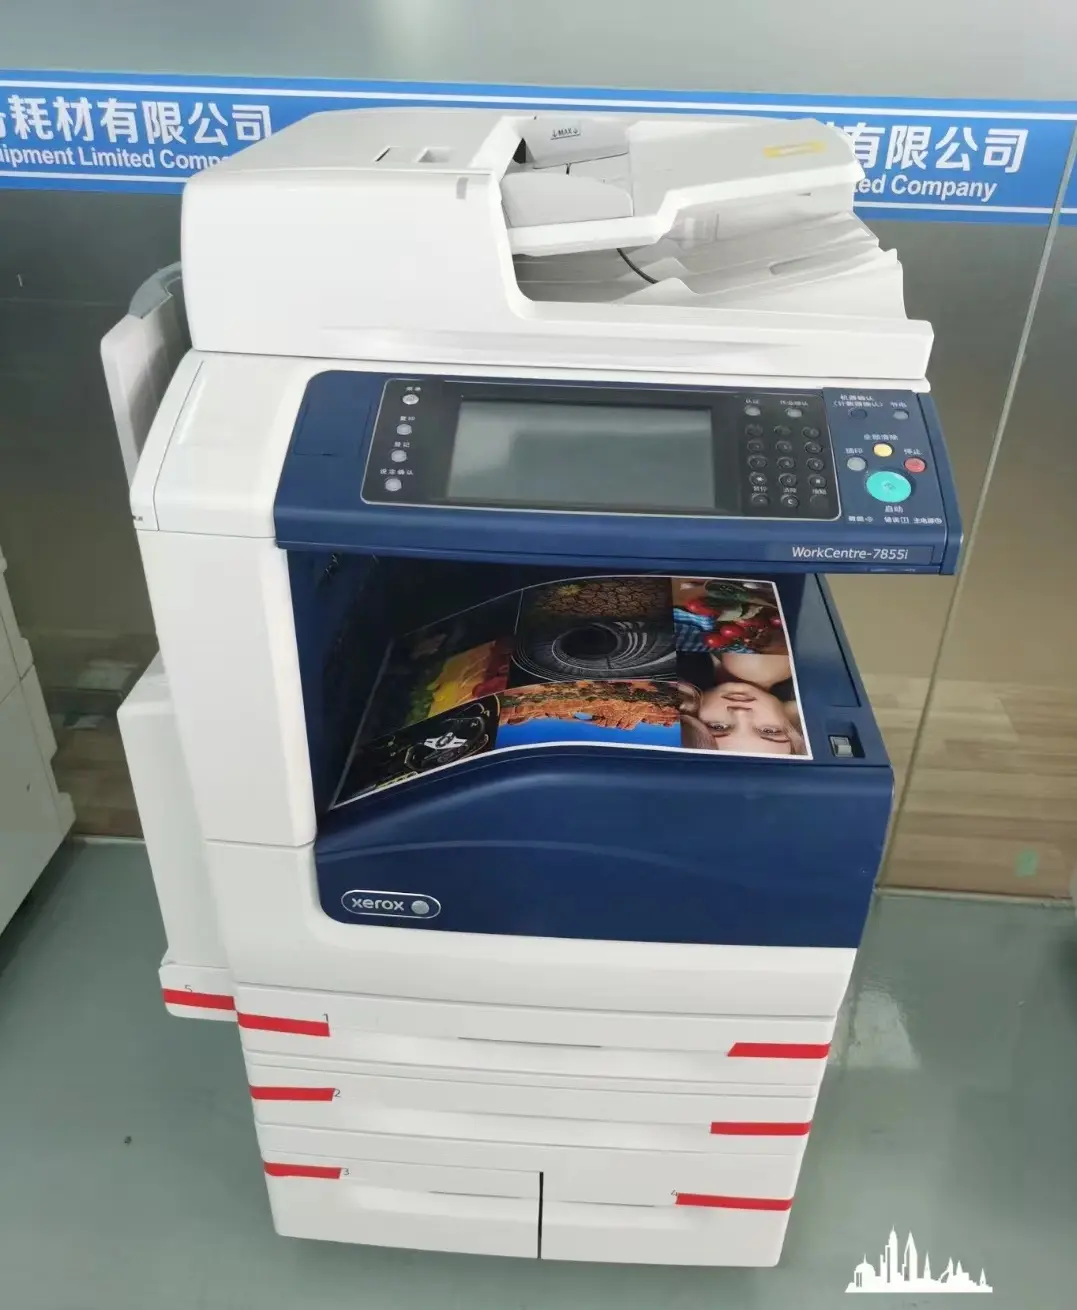 Commercial Photocopiers Large Laser Copiers Machine A3 Office Color Printer for Xerox Workcentre 7835 7855 5575